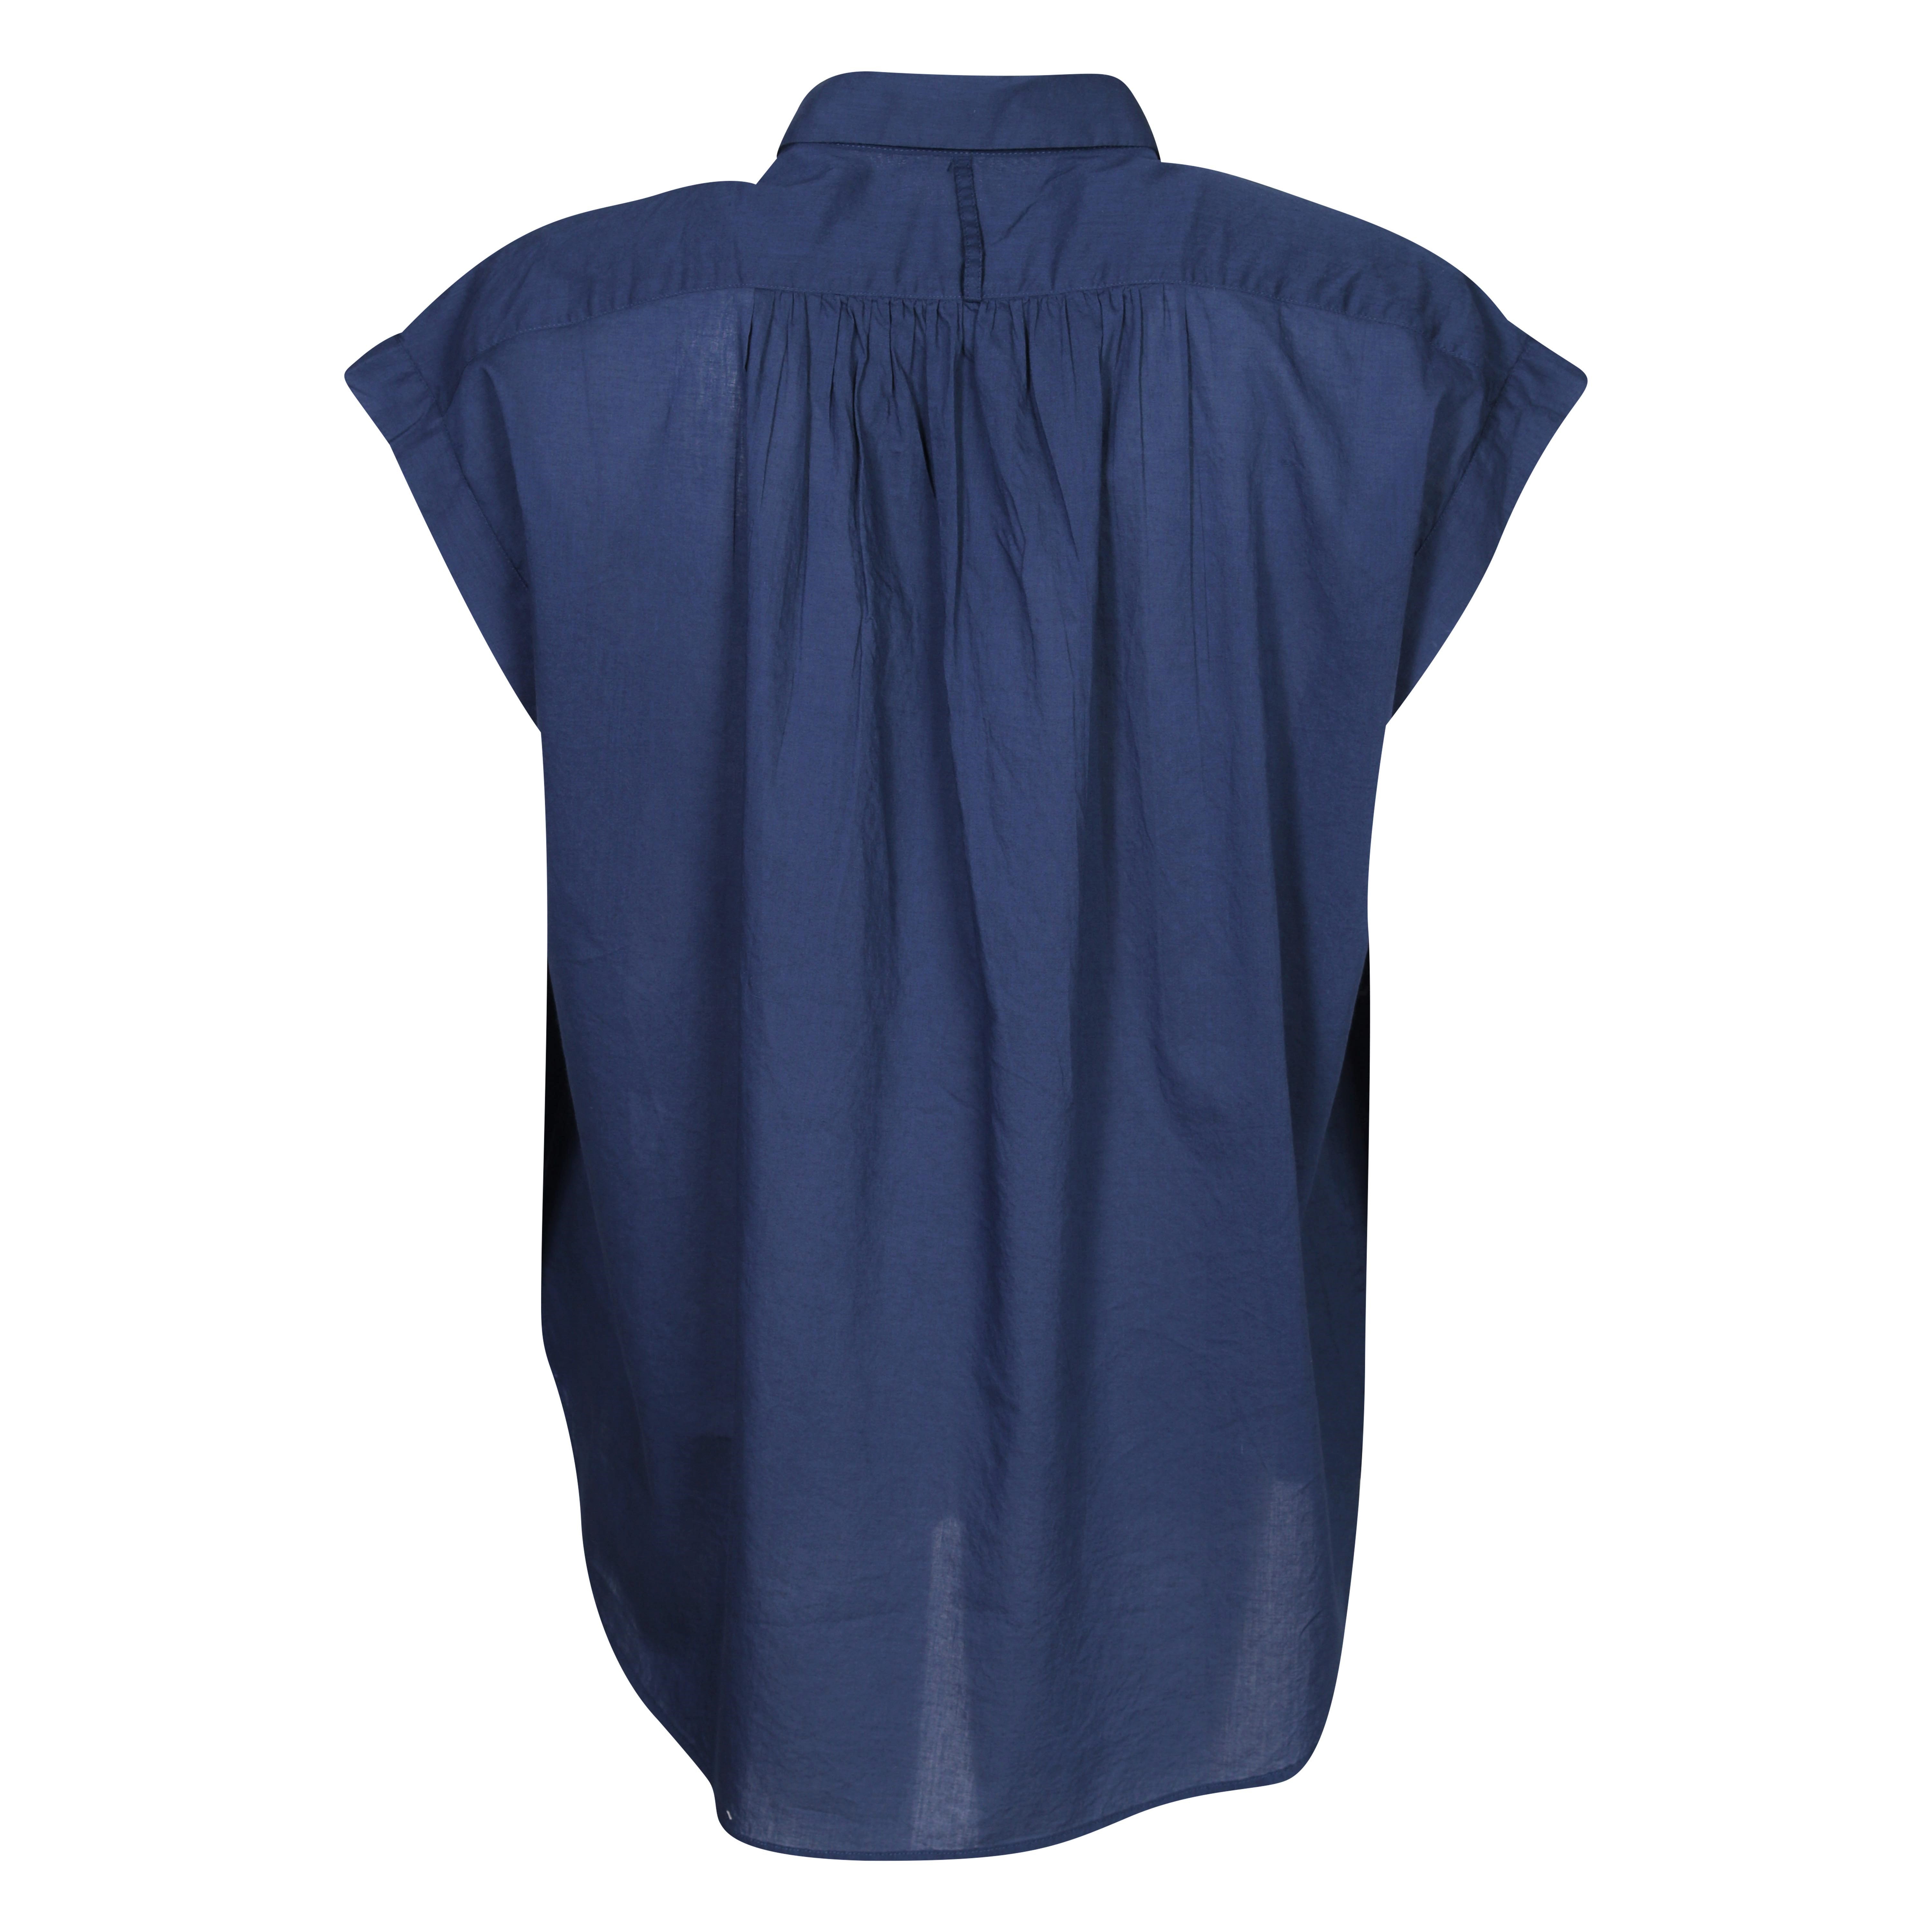 Nili Lotan Cotton Voile Blouse Normandy in Marine Blue S